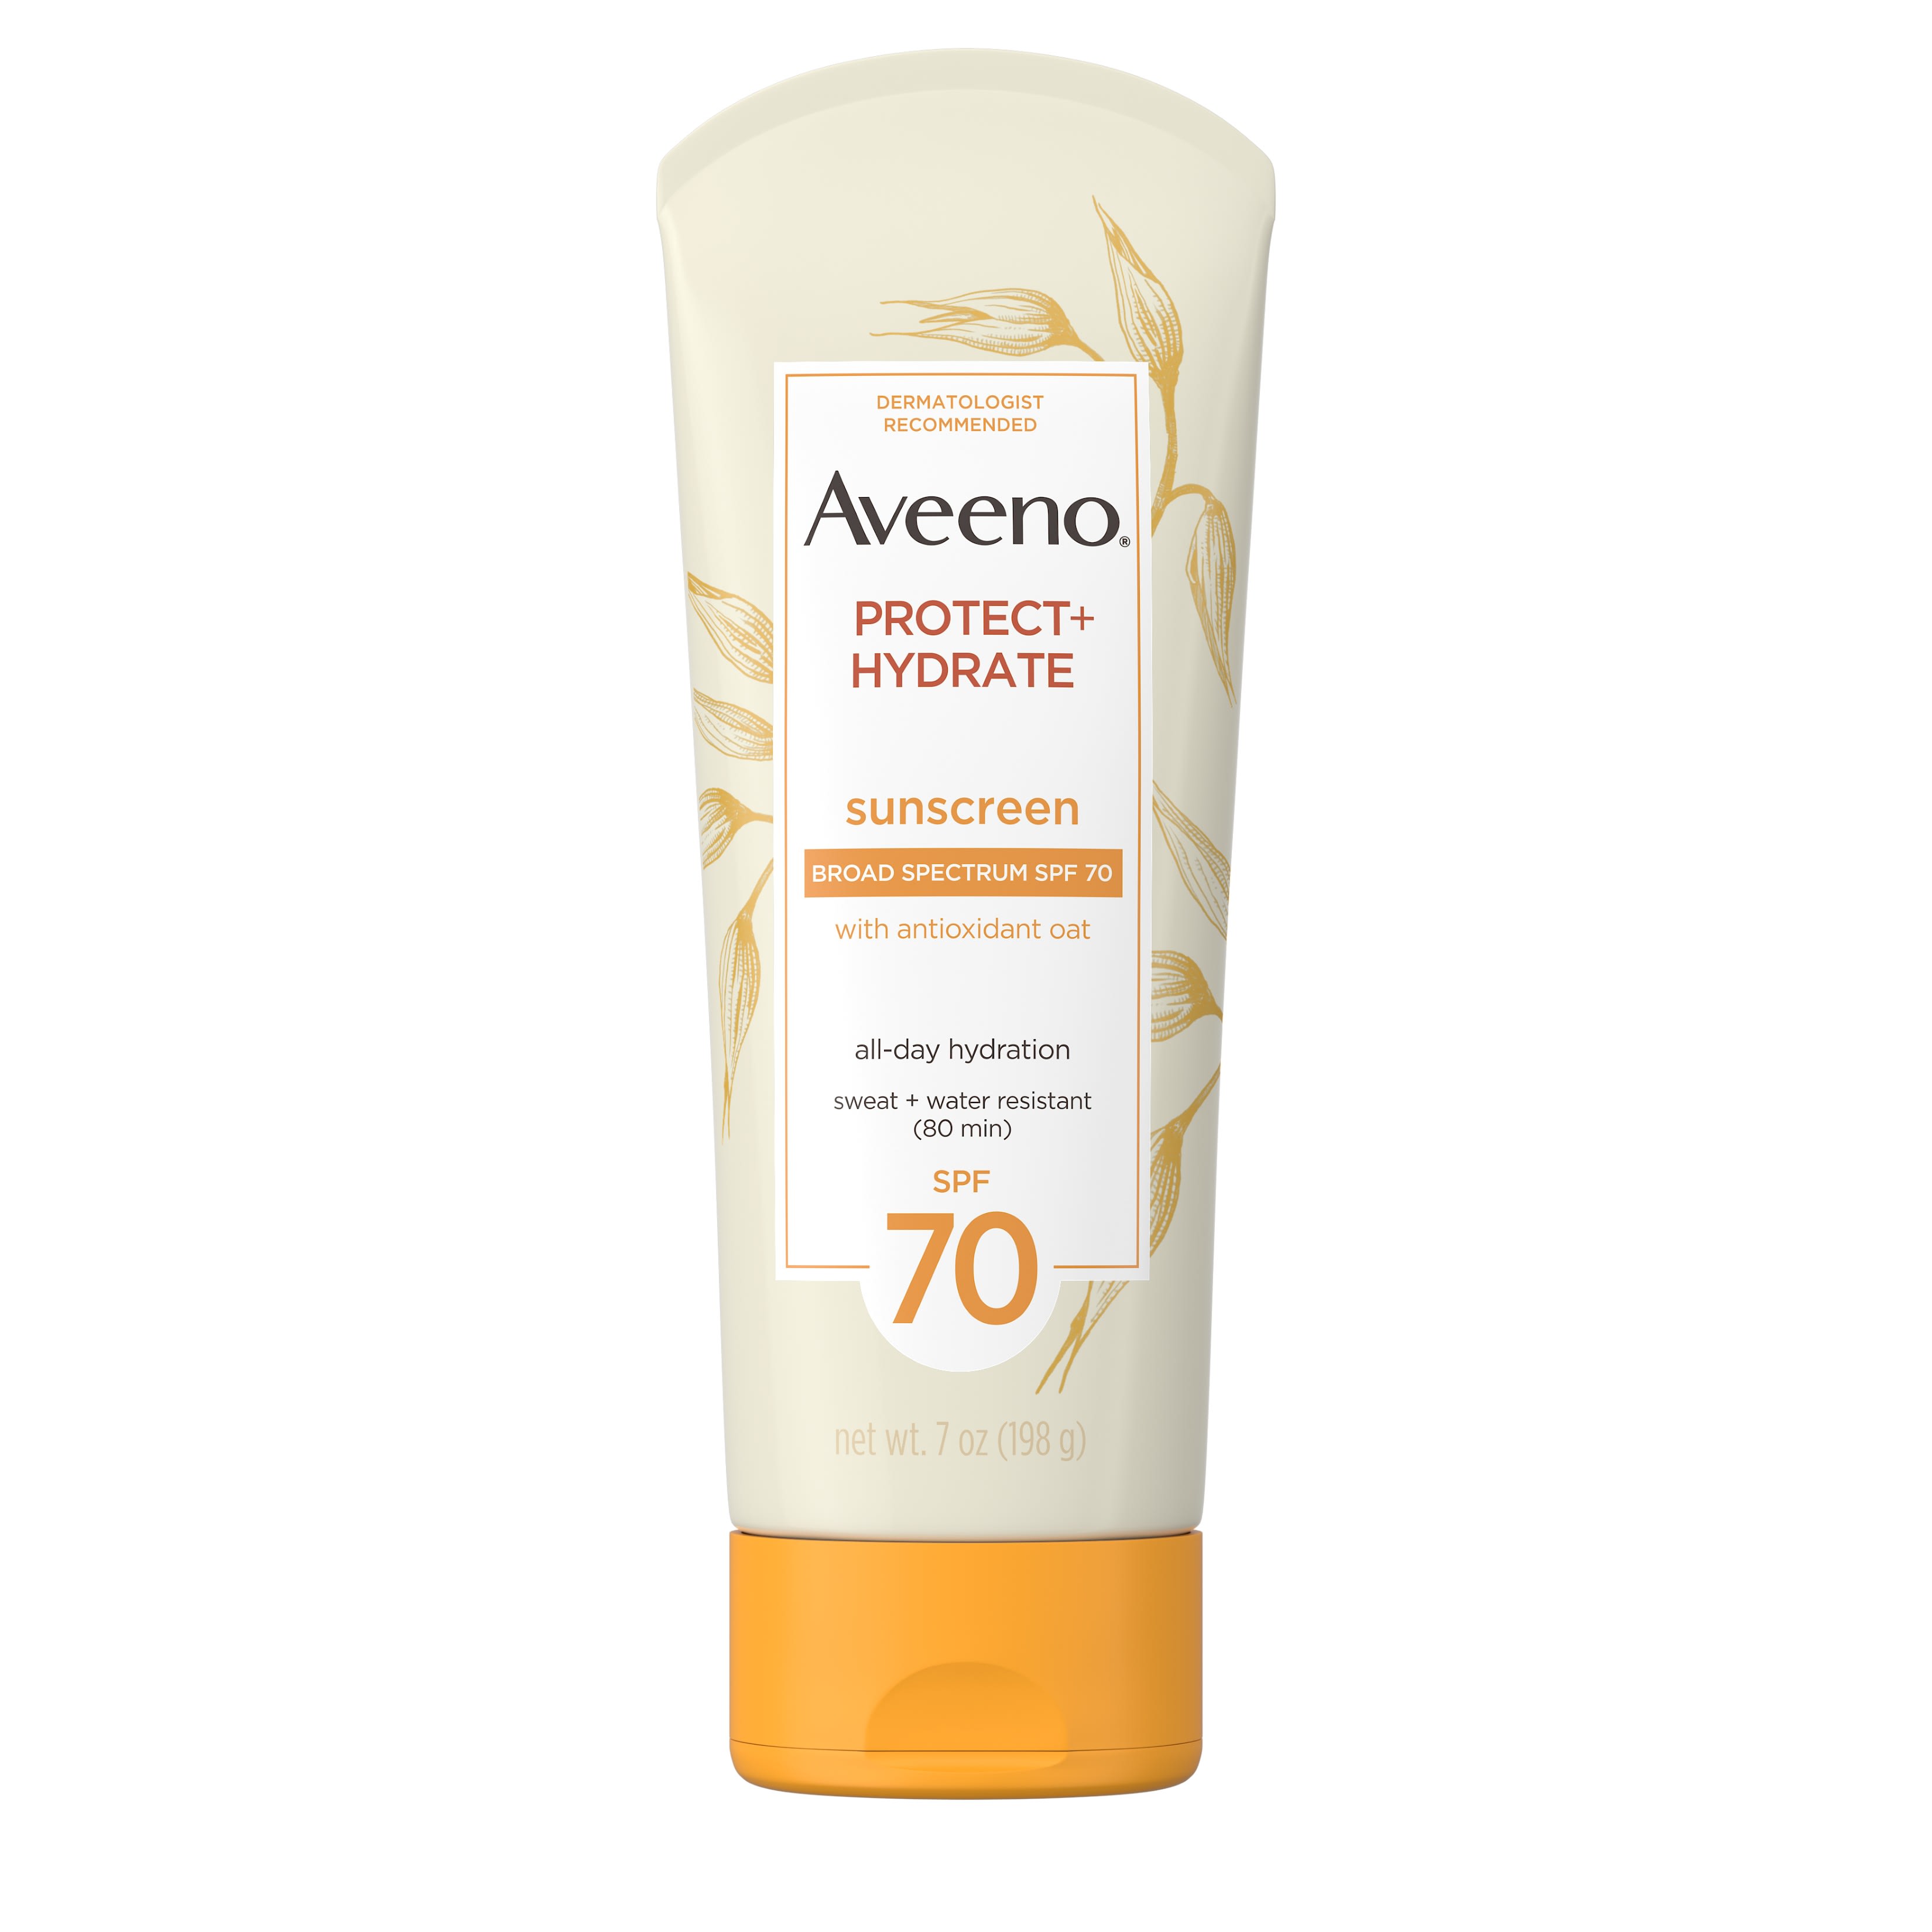 Aveeno Protect + Hydrate SPF 70 Sunscreen Lotion, Oil-Free, 7 oz - image 1 of 19